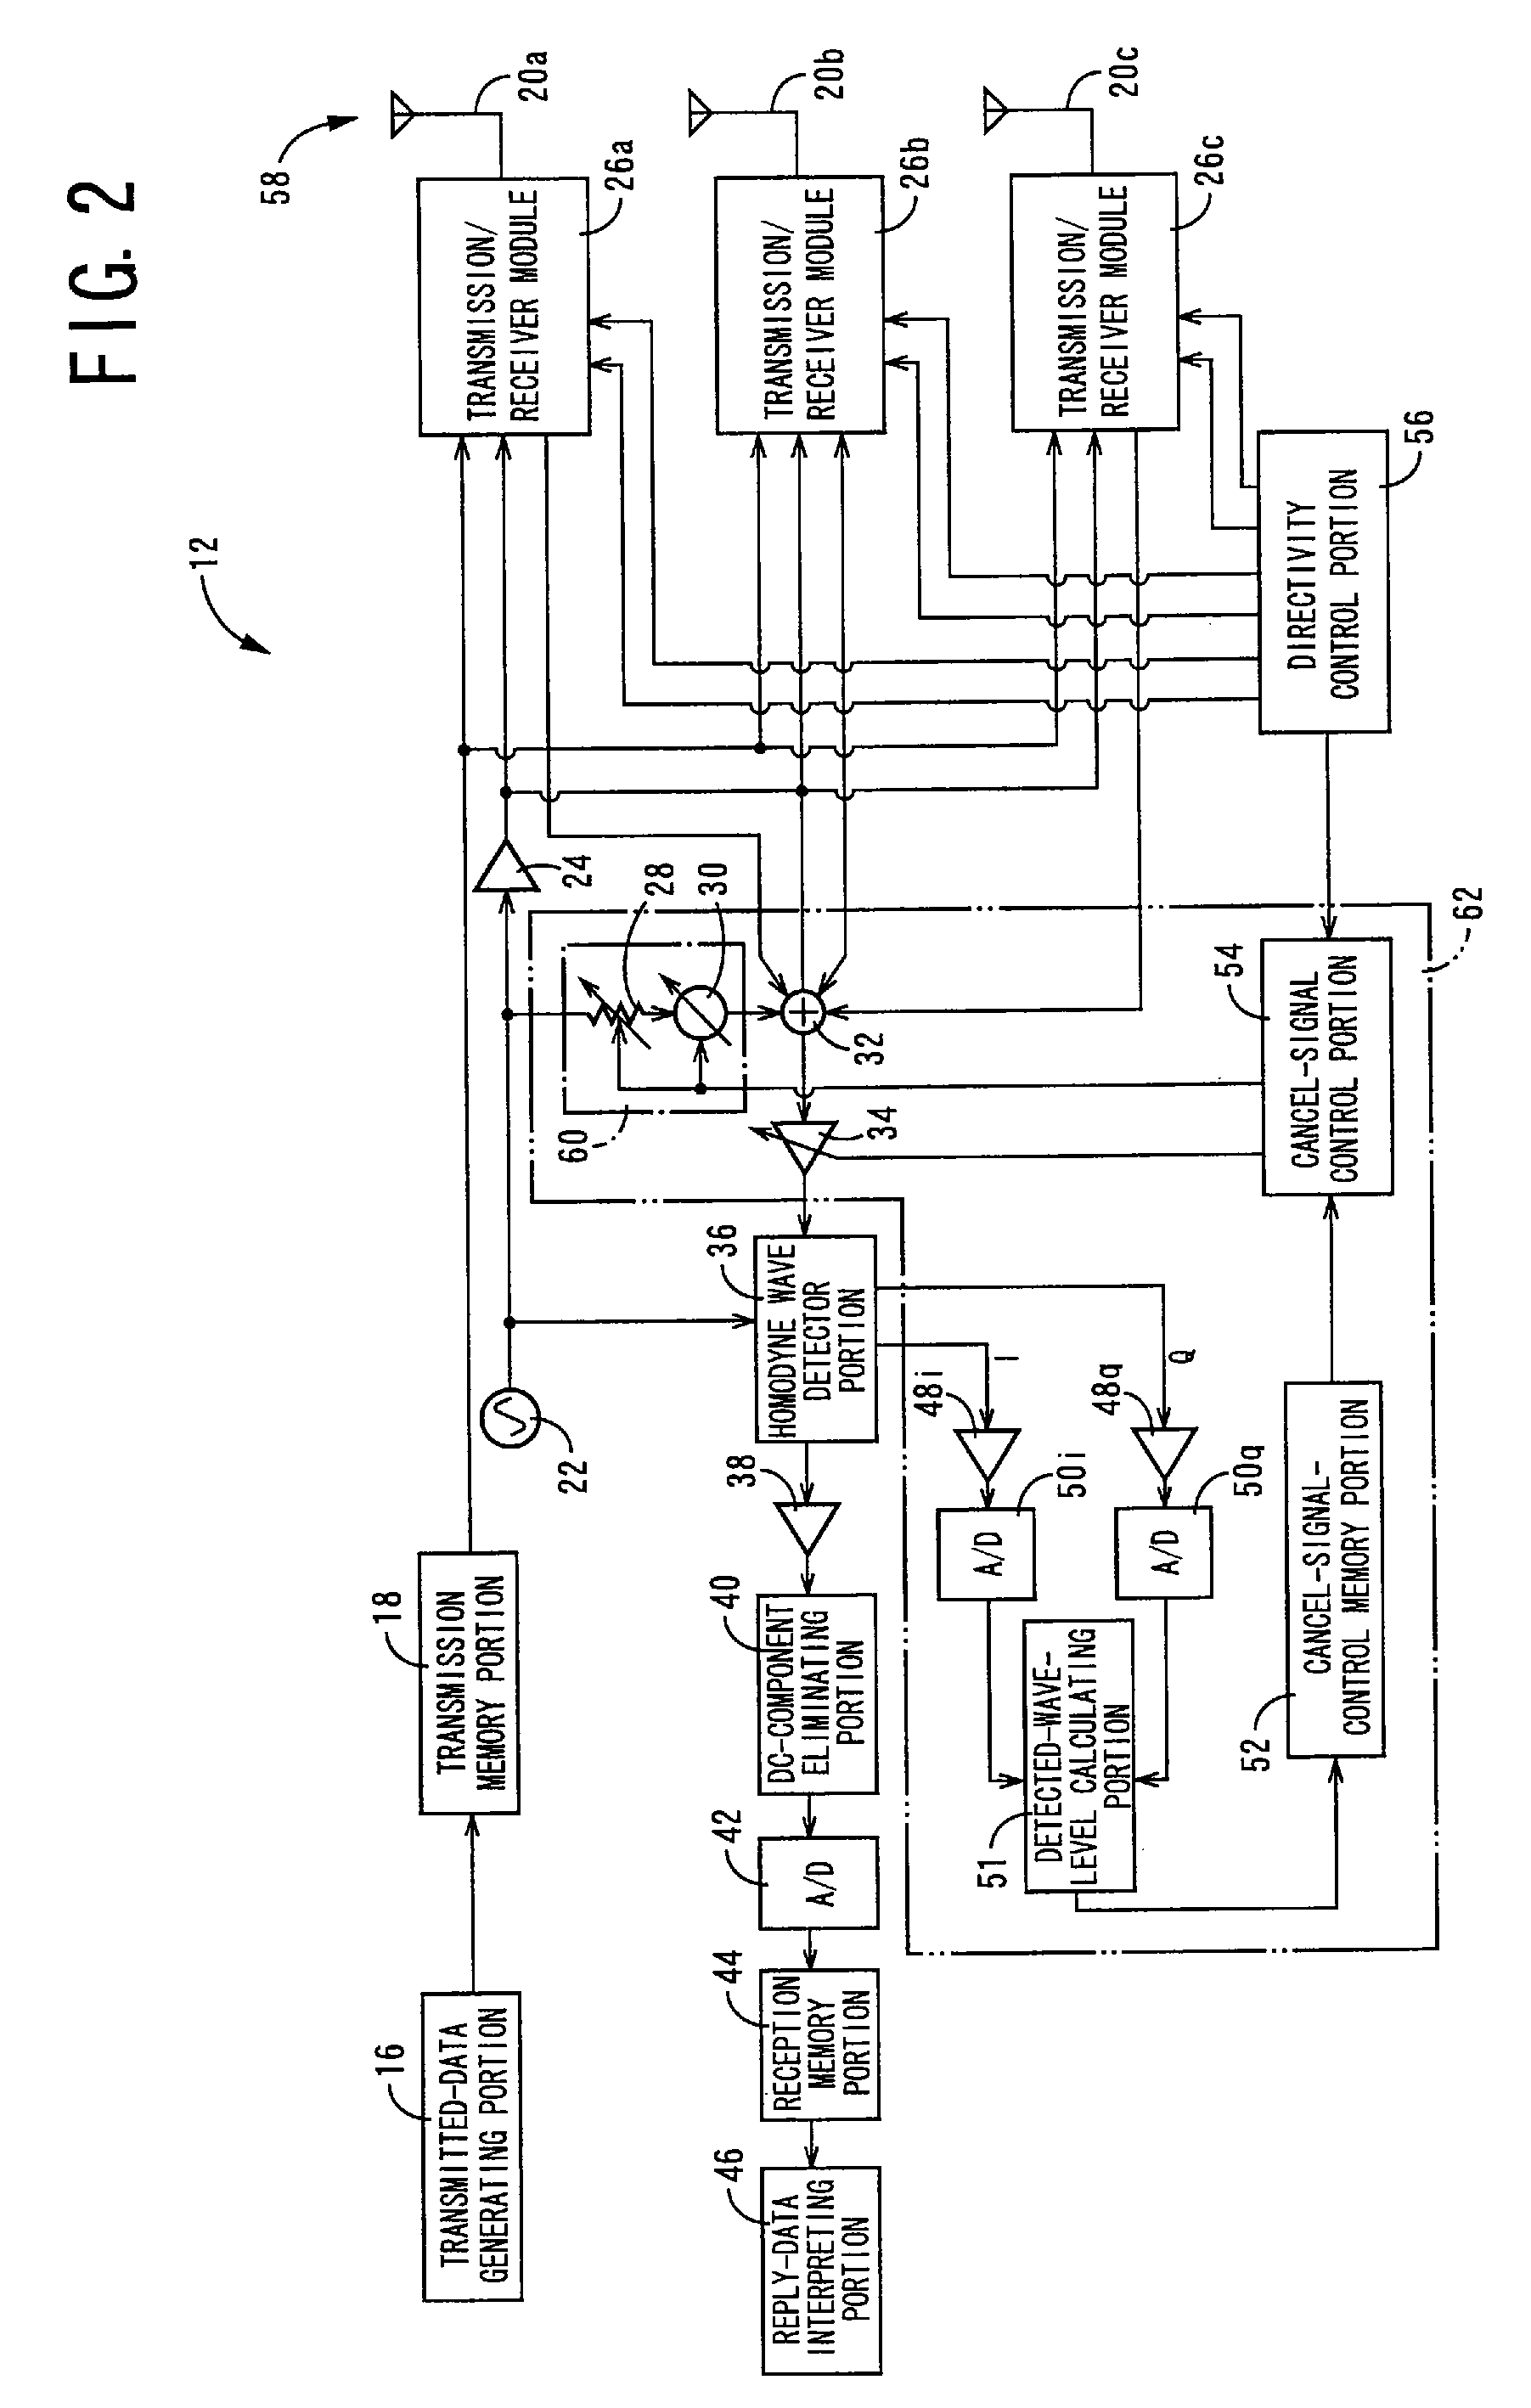 Radio-frequency tag communication device